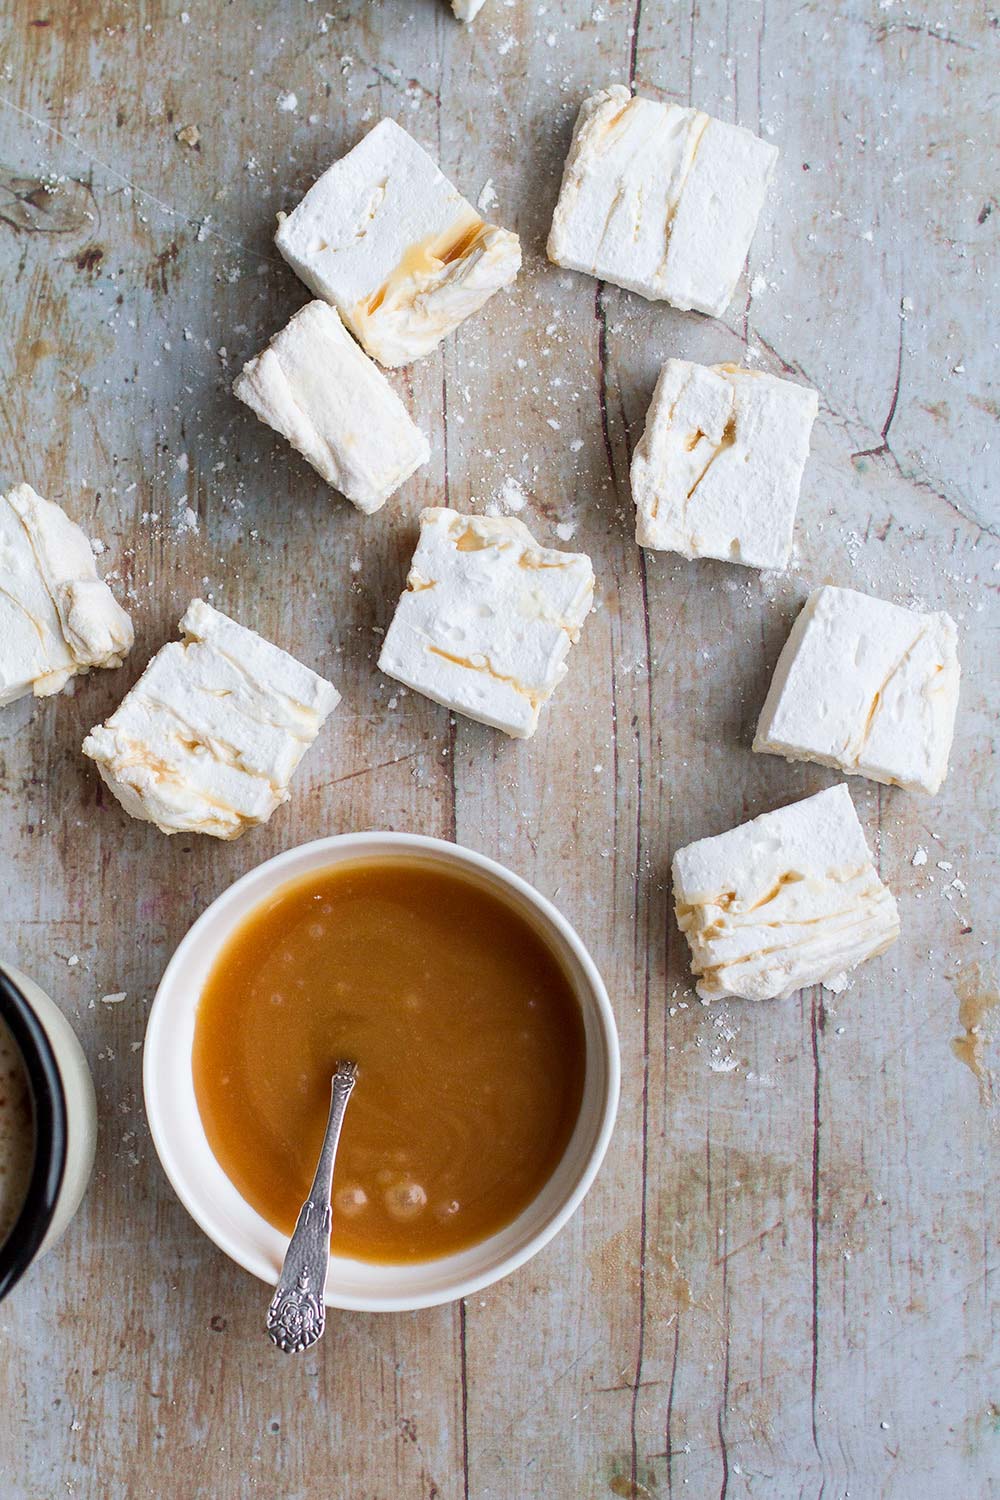 Marshmallows with a small bowl of salted caramel.